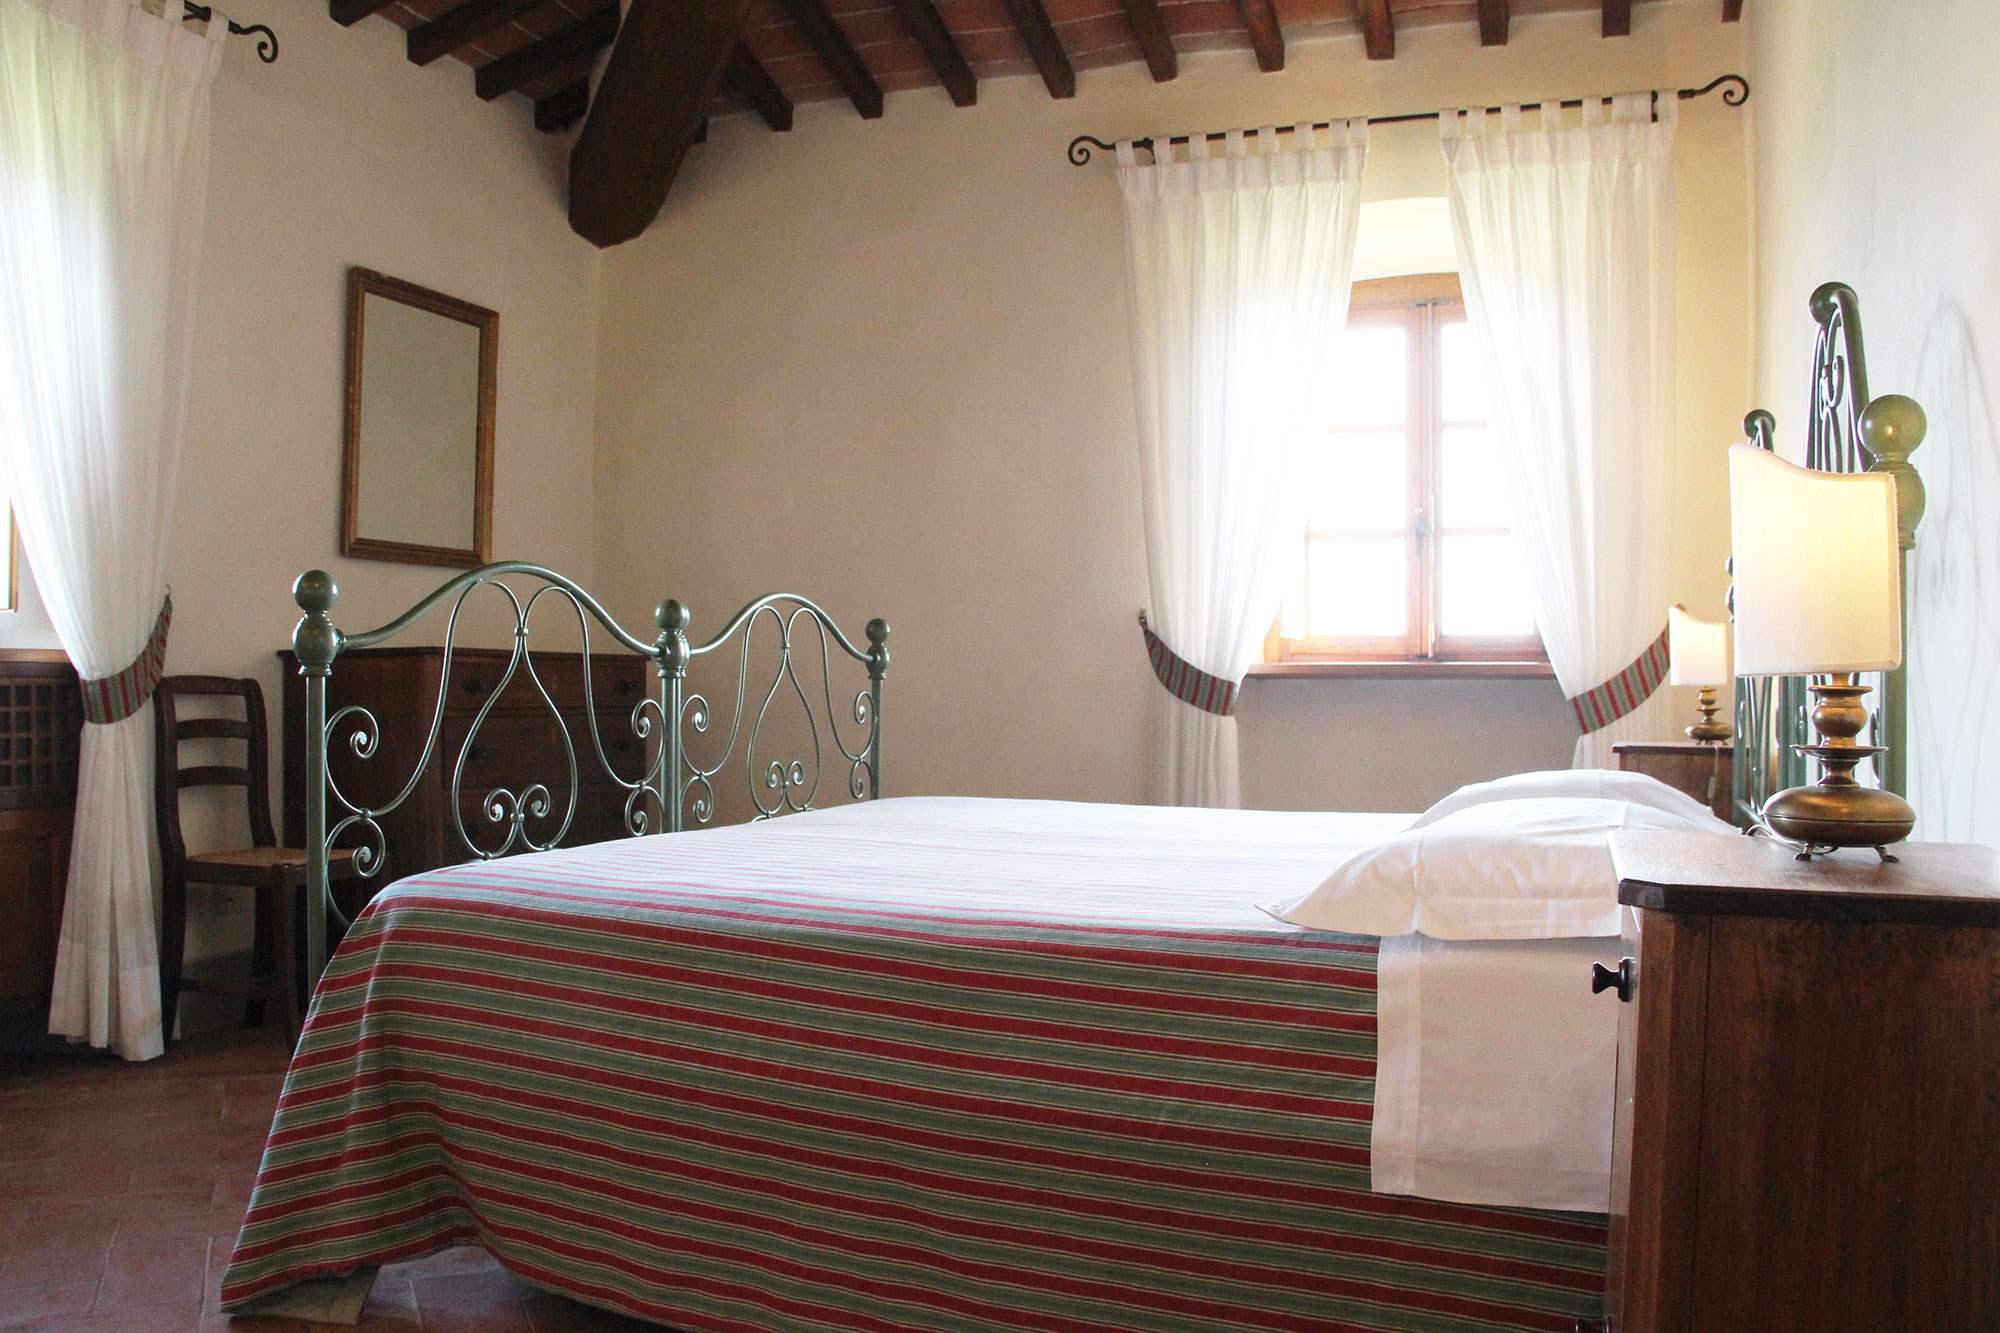 Apartment Loggia, 4 bedroom apartment in Chianti & Countryside, Tuscany Photo #15